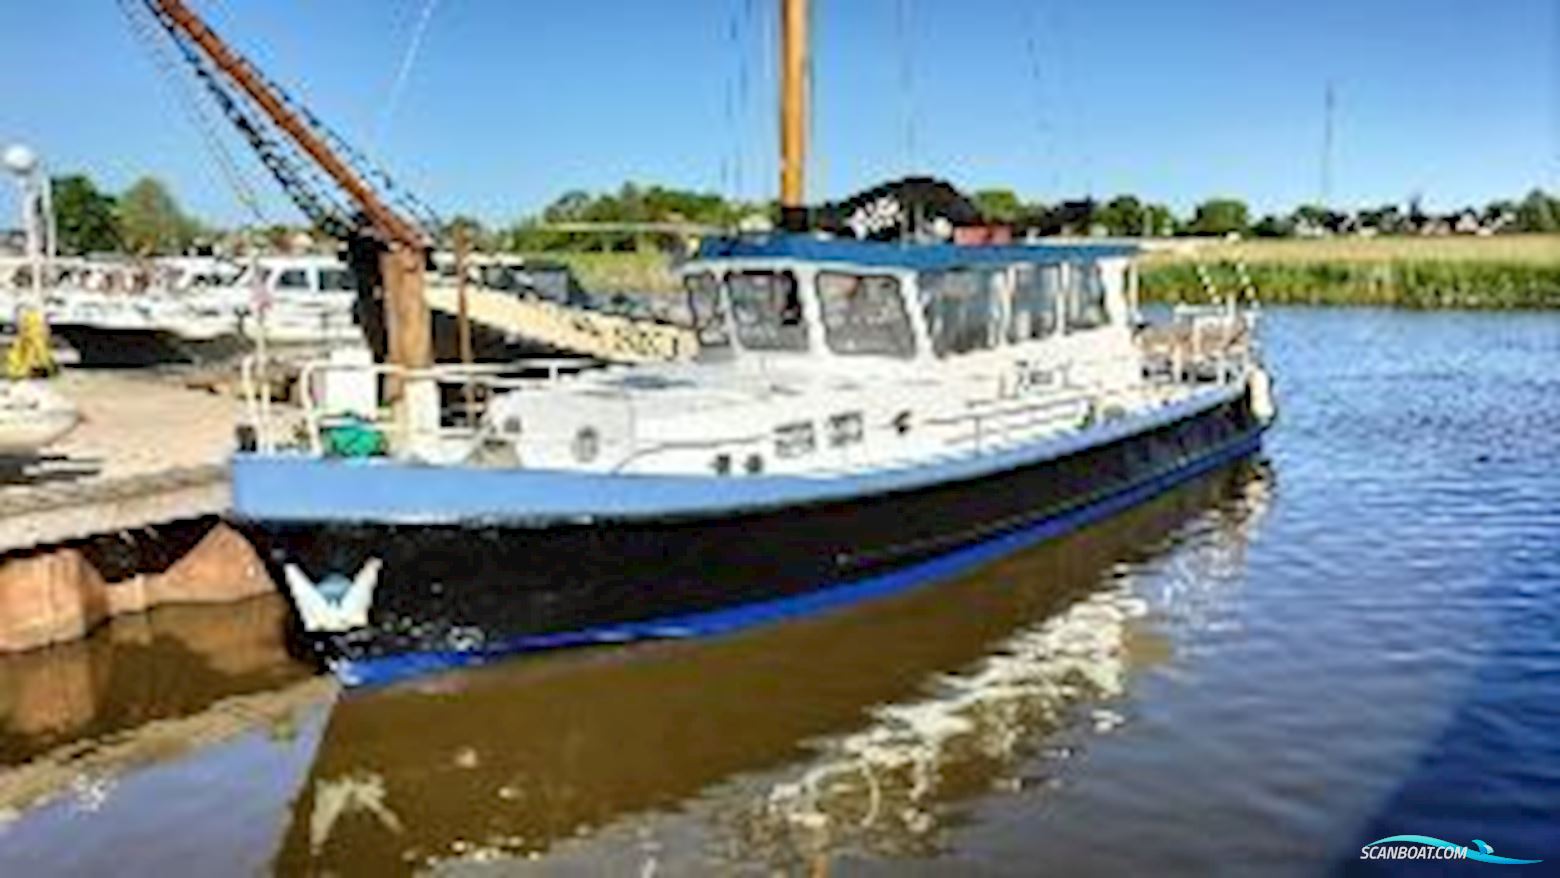 Ex-Werkboot 13.25 Motor boat 1960, with Ford Lehman engine, The Netherlands